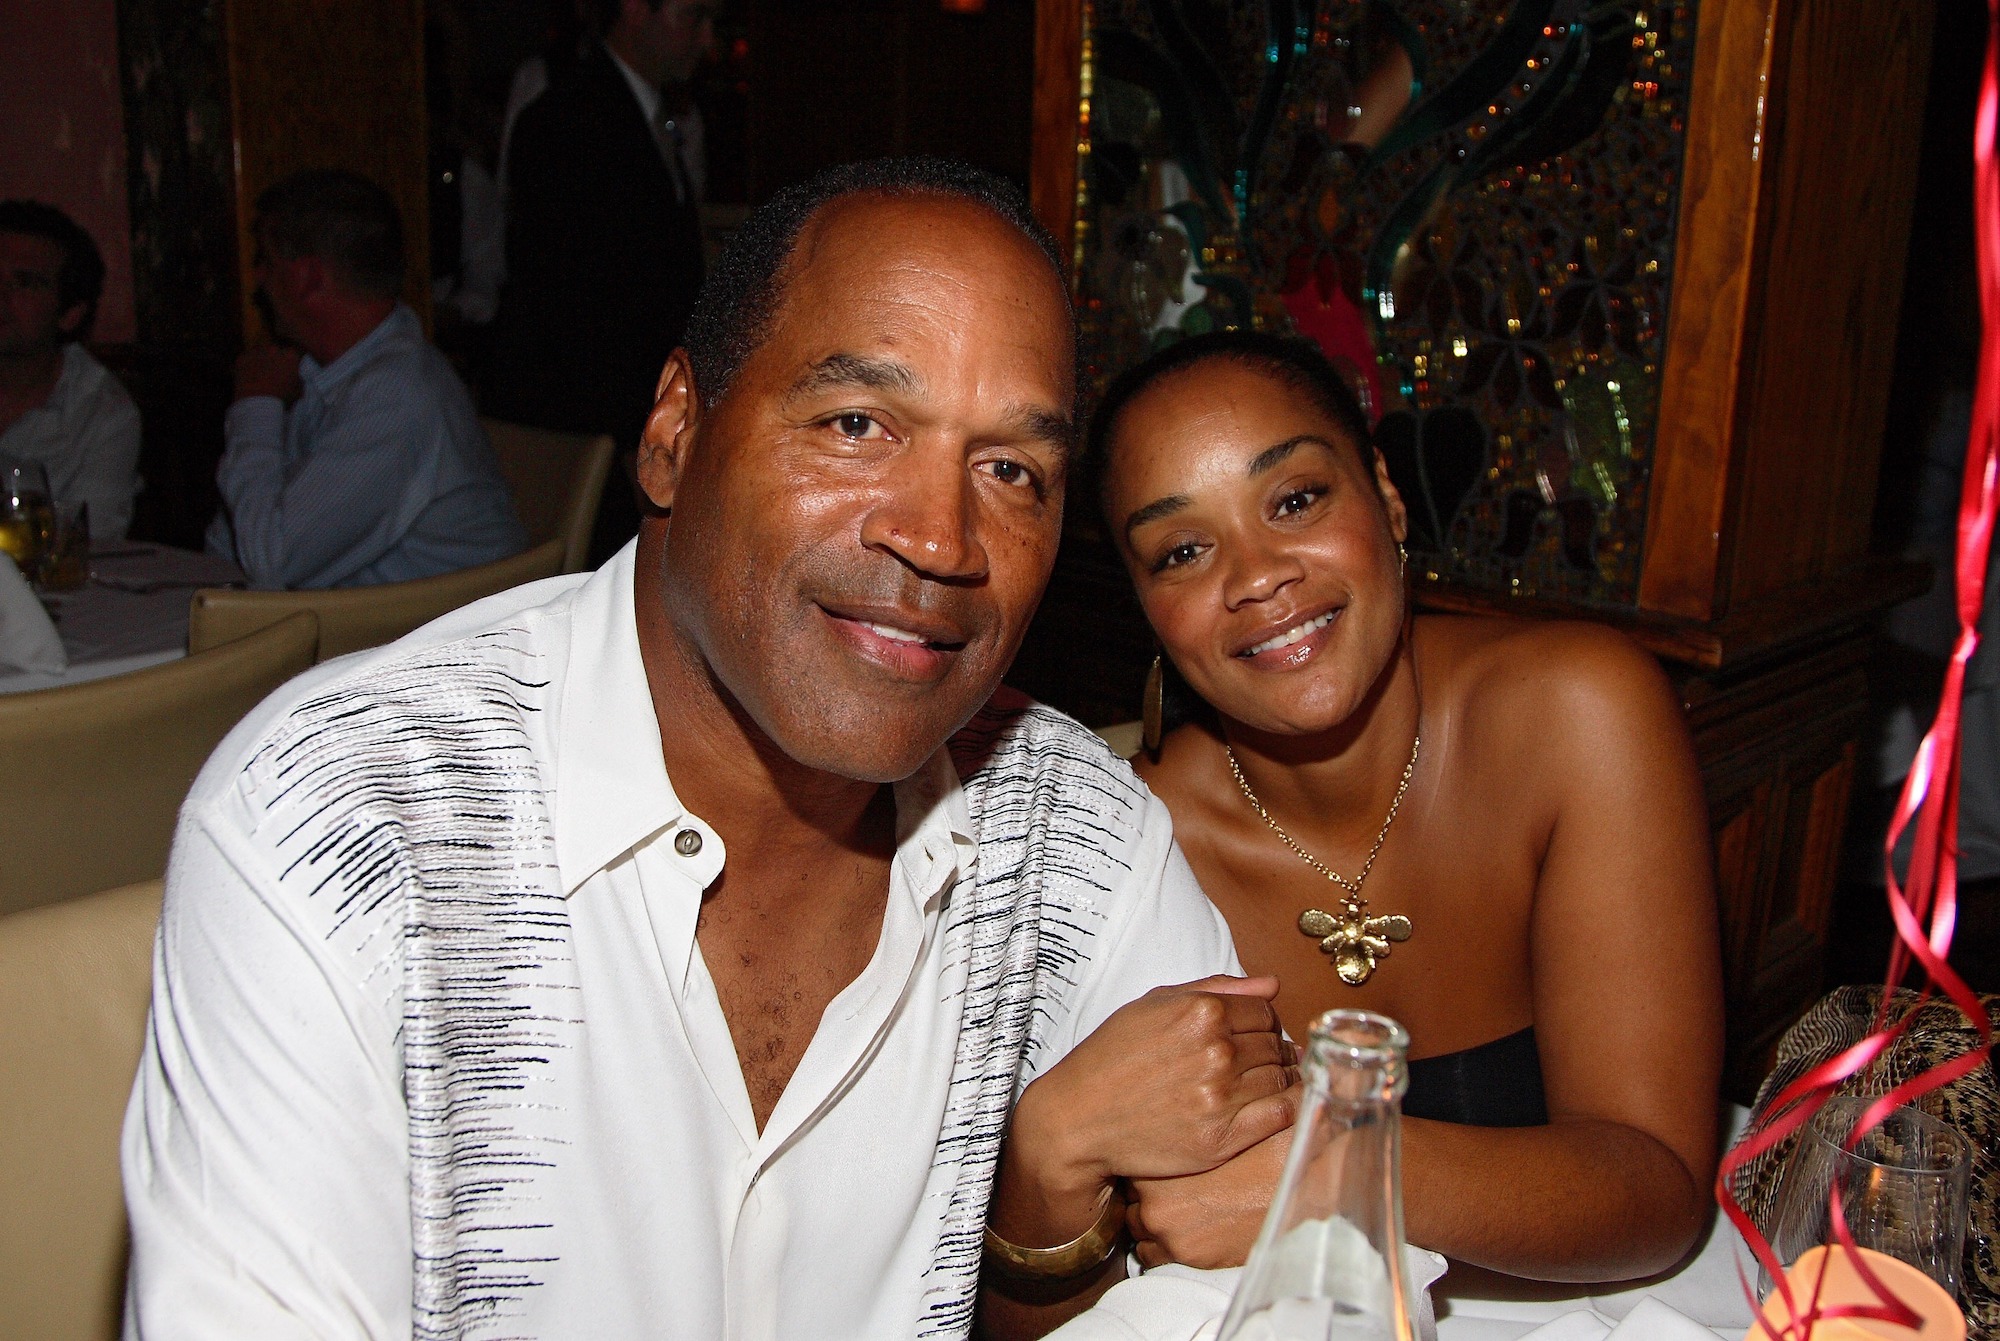 (L-R) O.J. Simpson and Arnelle Simpson smiling at a dinner table